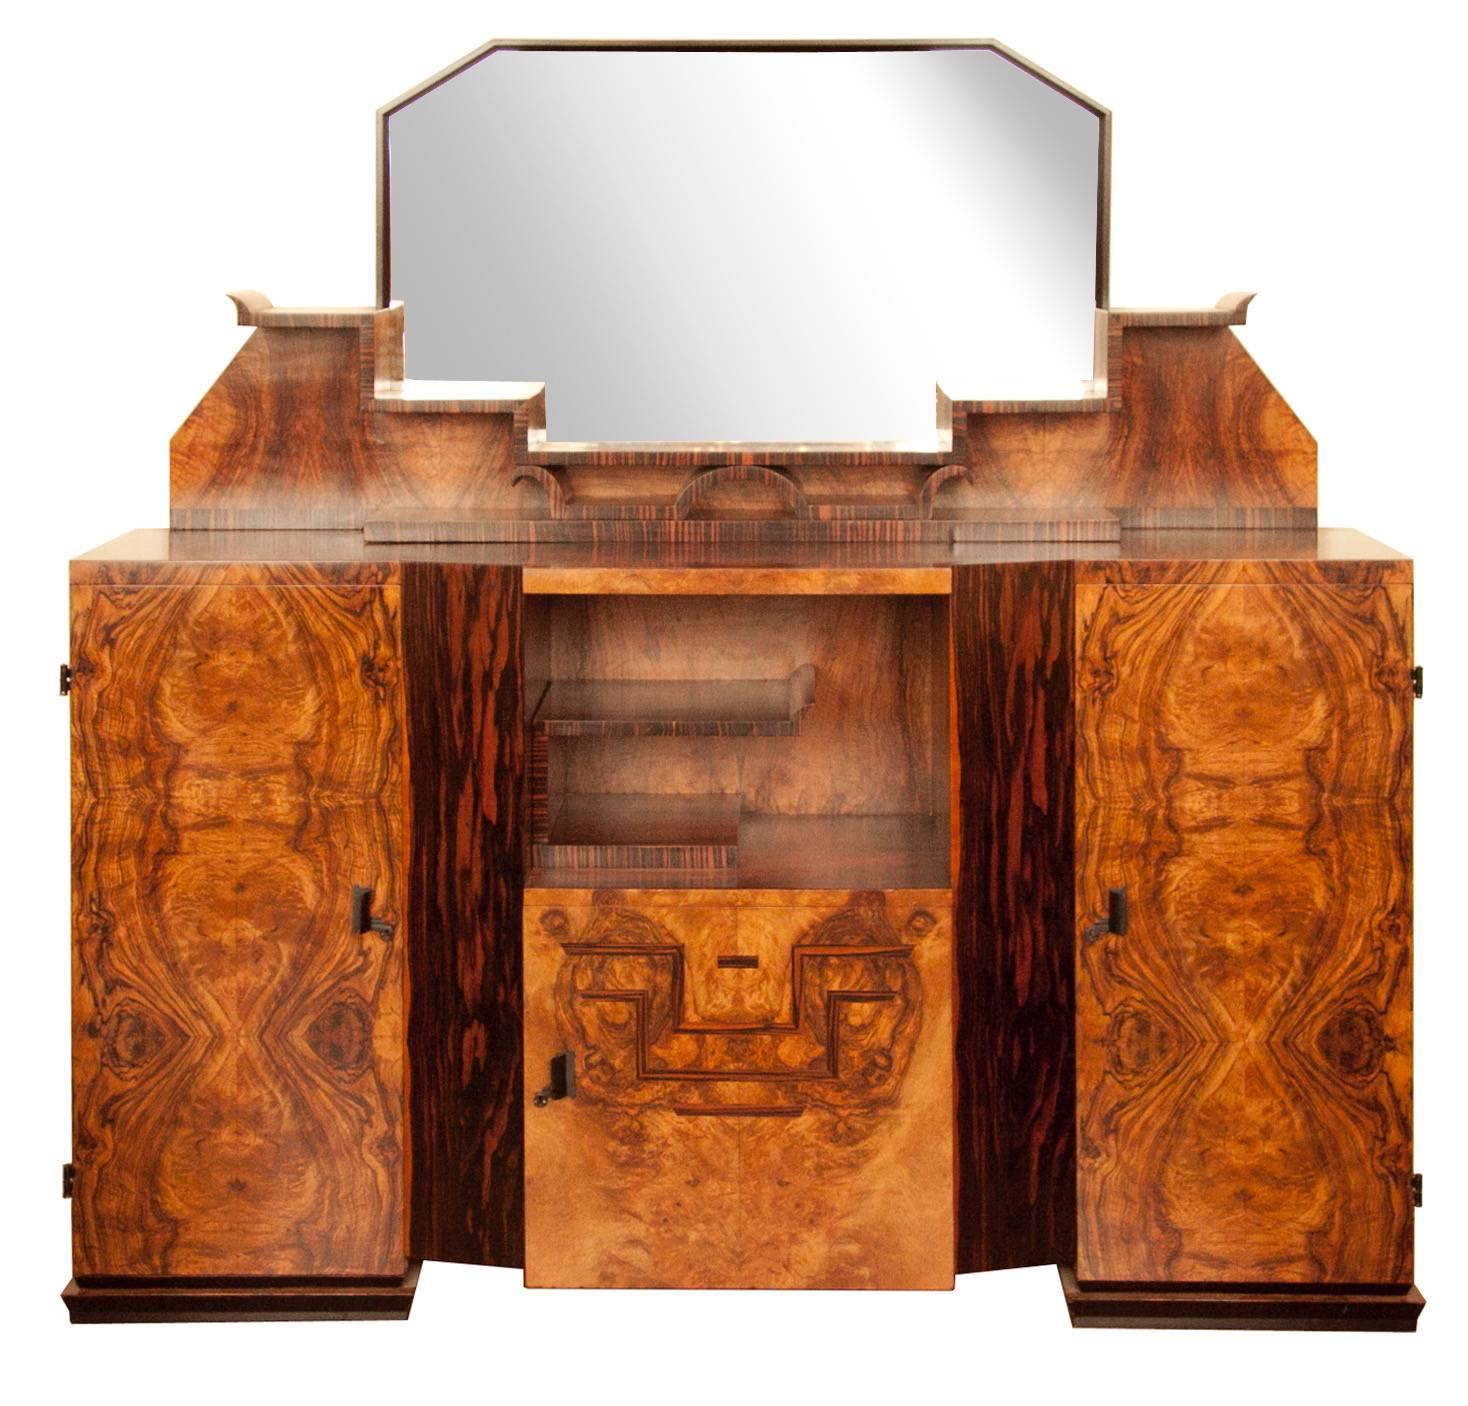 Monumental Italian Art Deco sideboard credenza
A stunning Architectural design sideboard credenza by Osvaldo Borsani, with the most impressive Spanish Olive wood and Macassar.
Measures: 177 cm H, 180 cm W, 54 cm D
Italy, circa 1930.